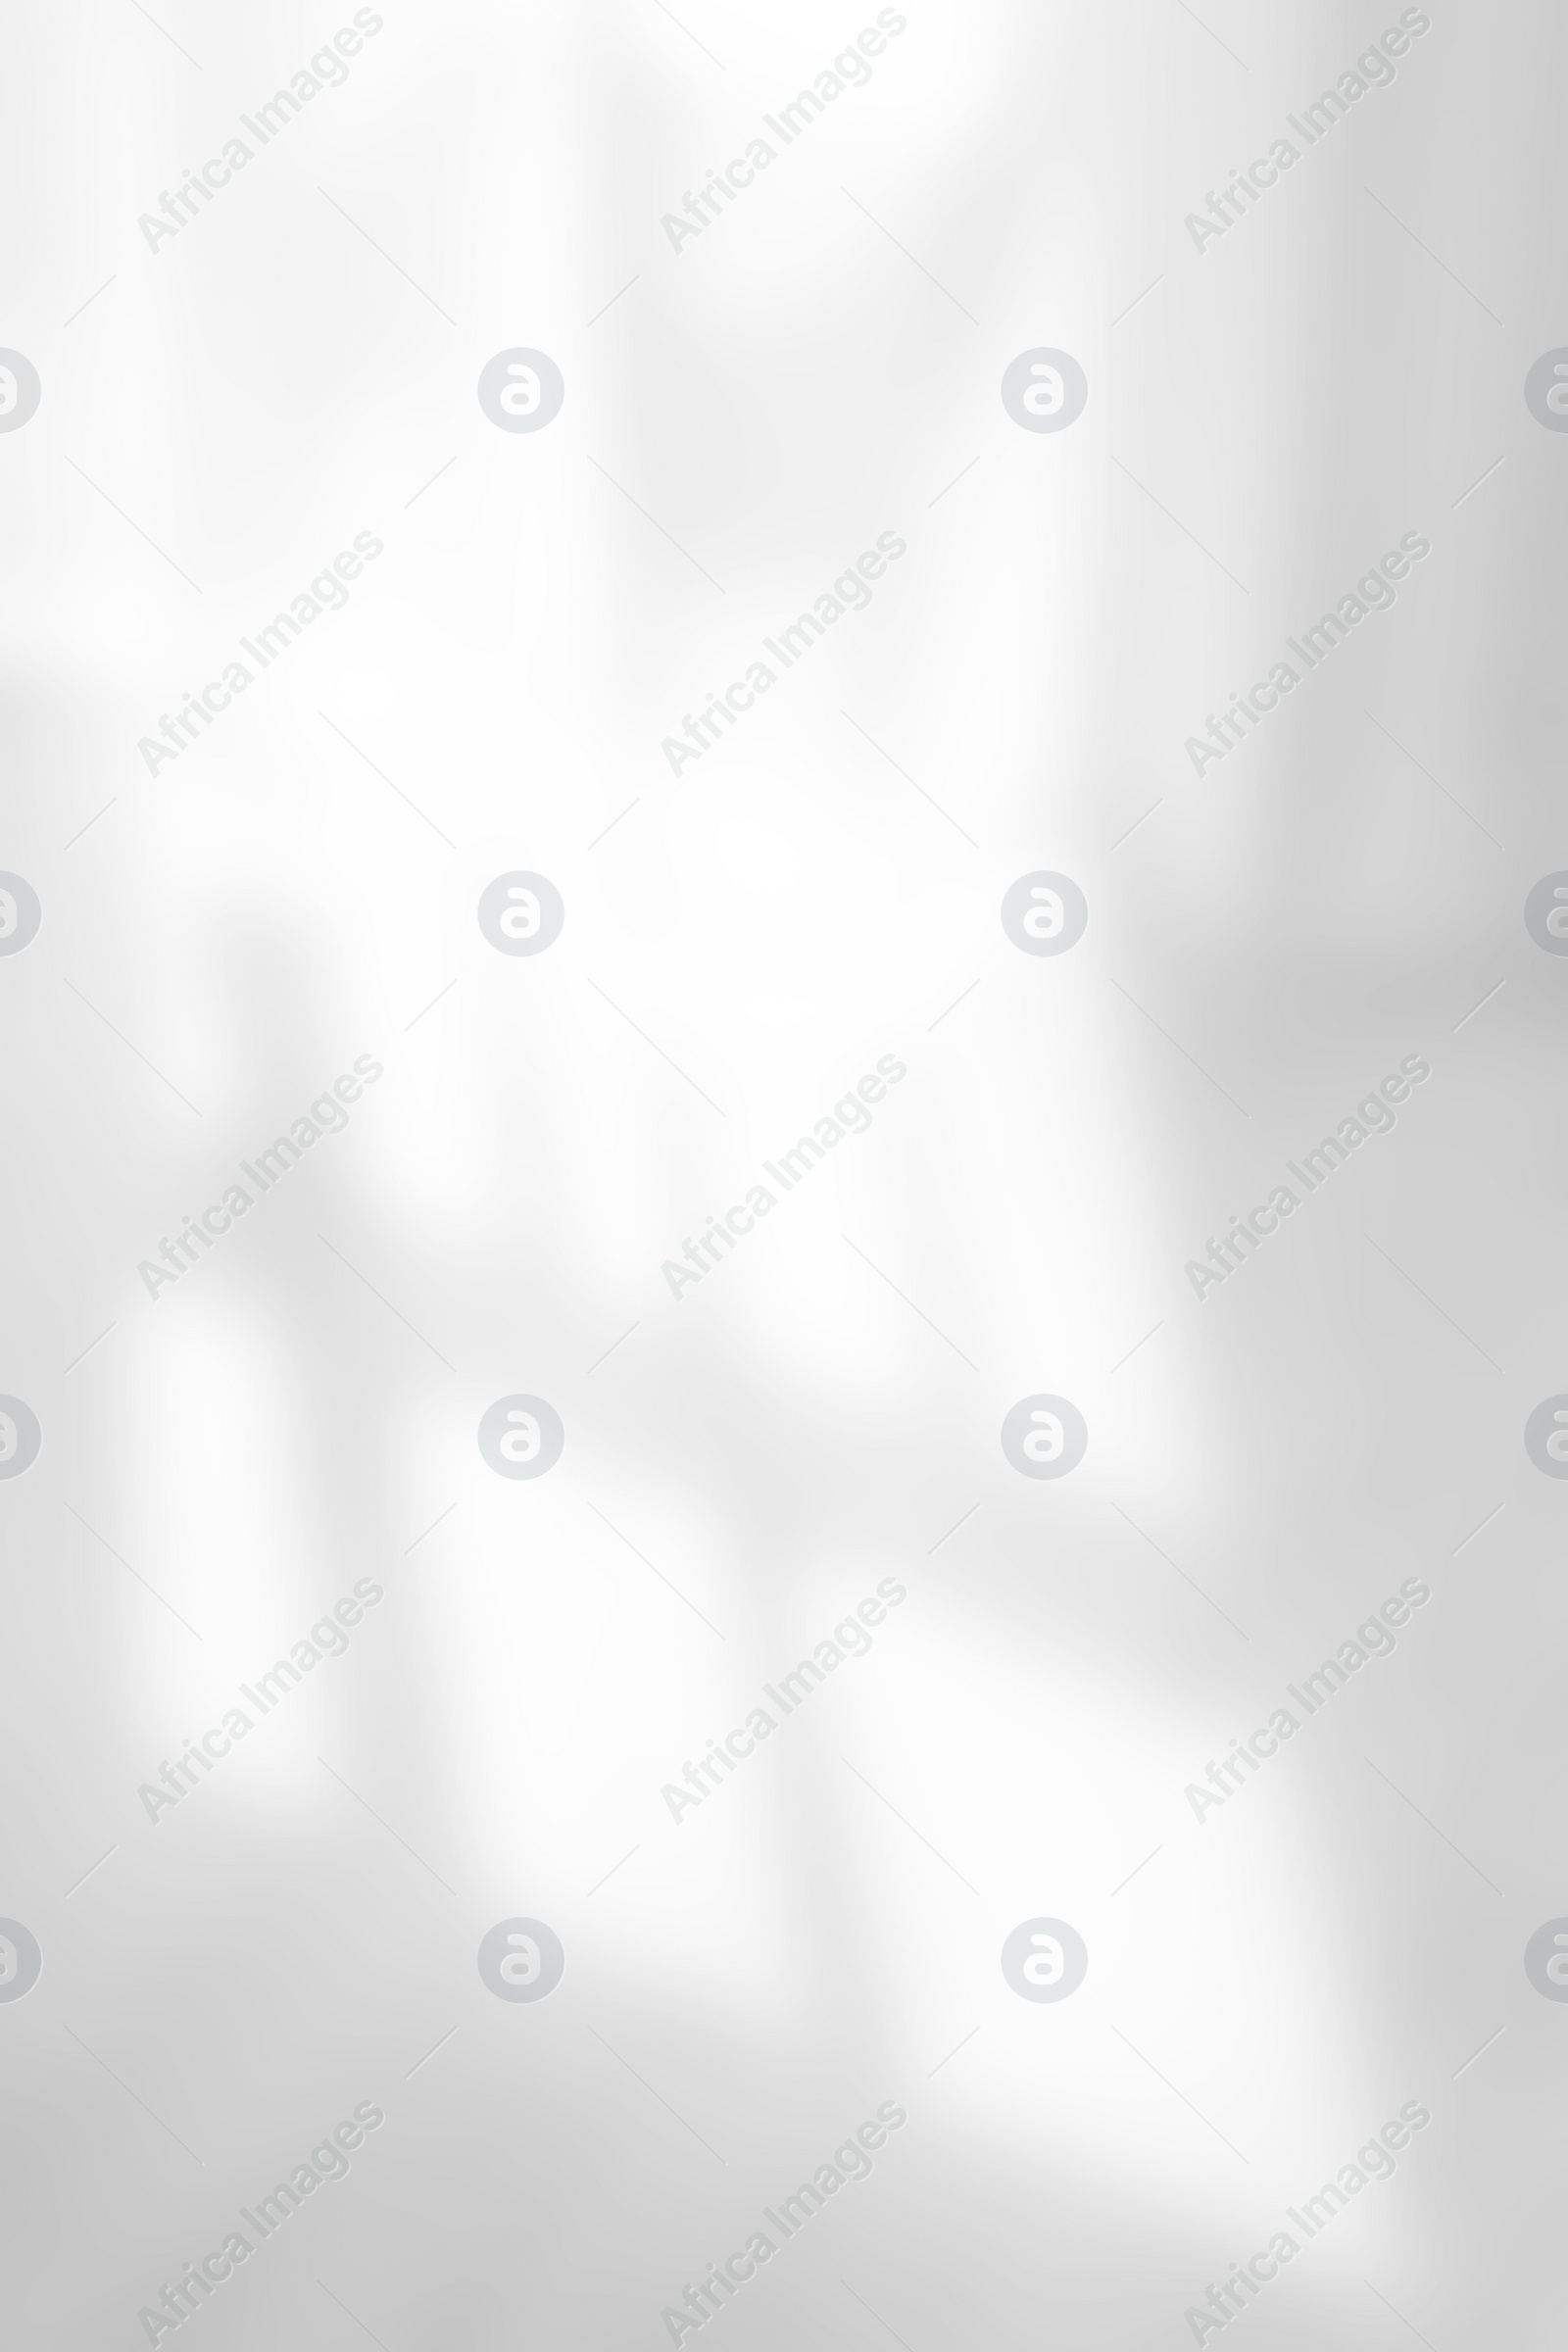 Image of Shadow on white floor in room, blurred view